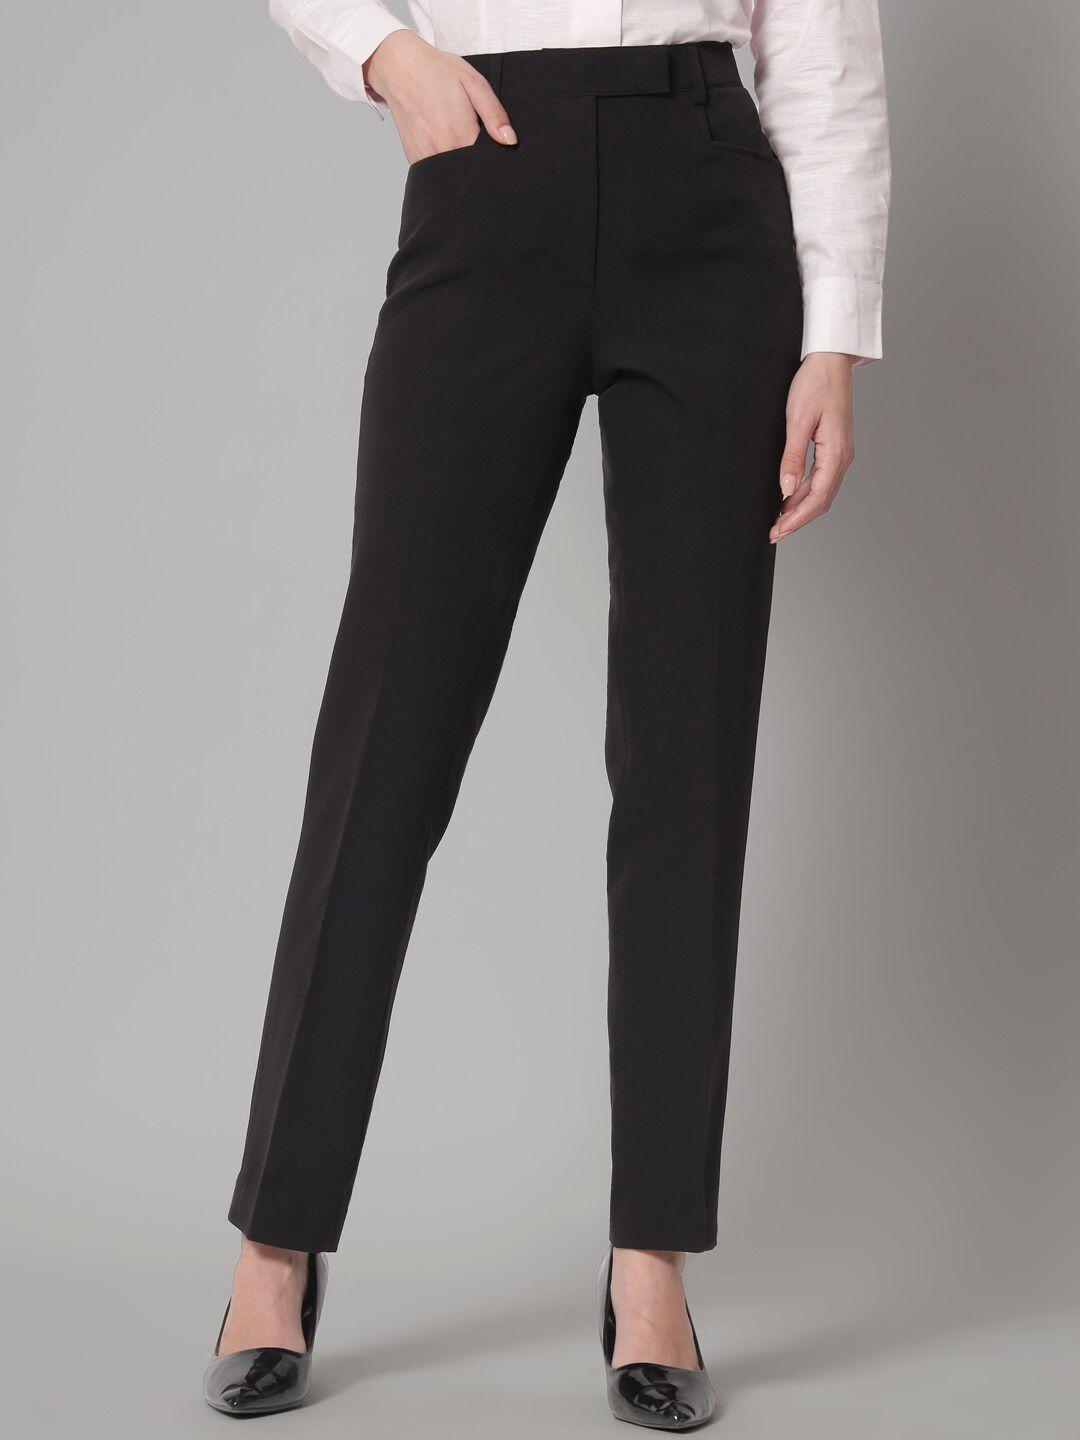 powersutra-women-comfort-mid-rise-formal-trousers